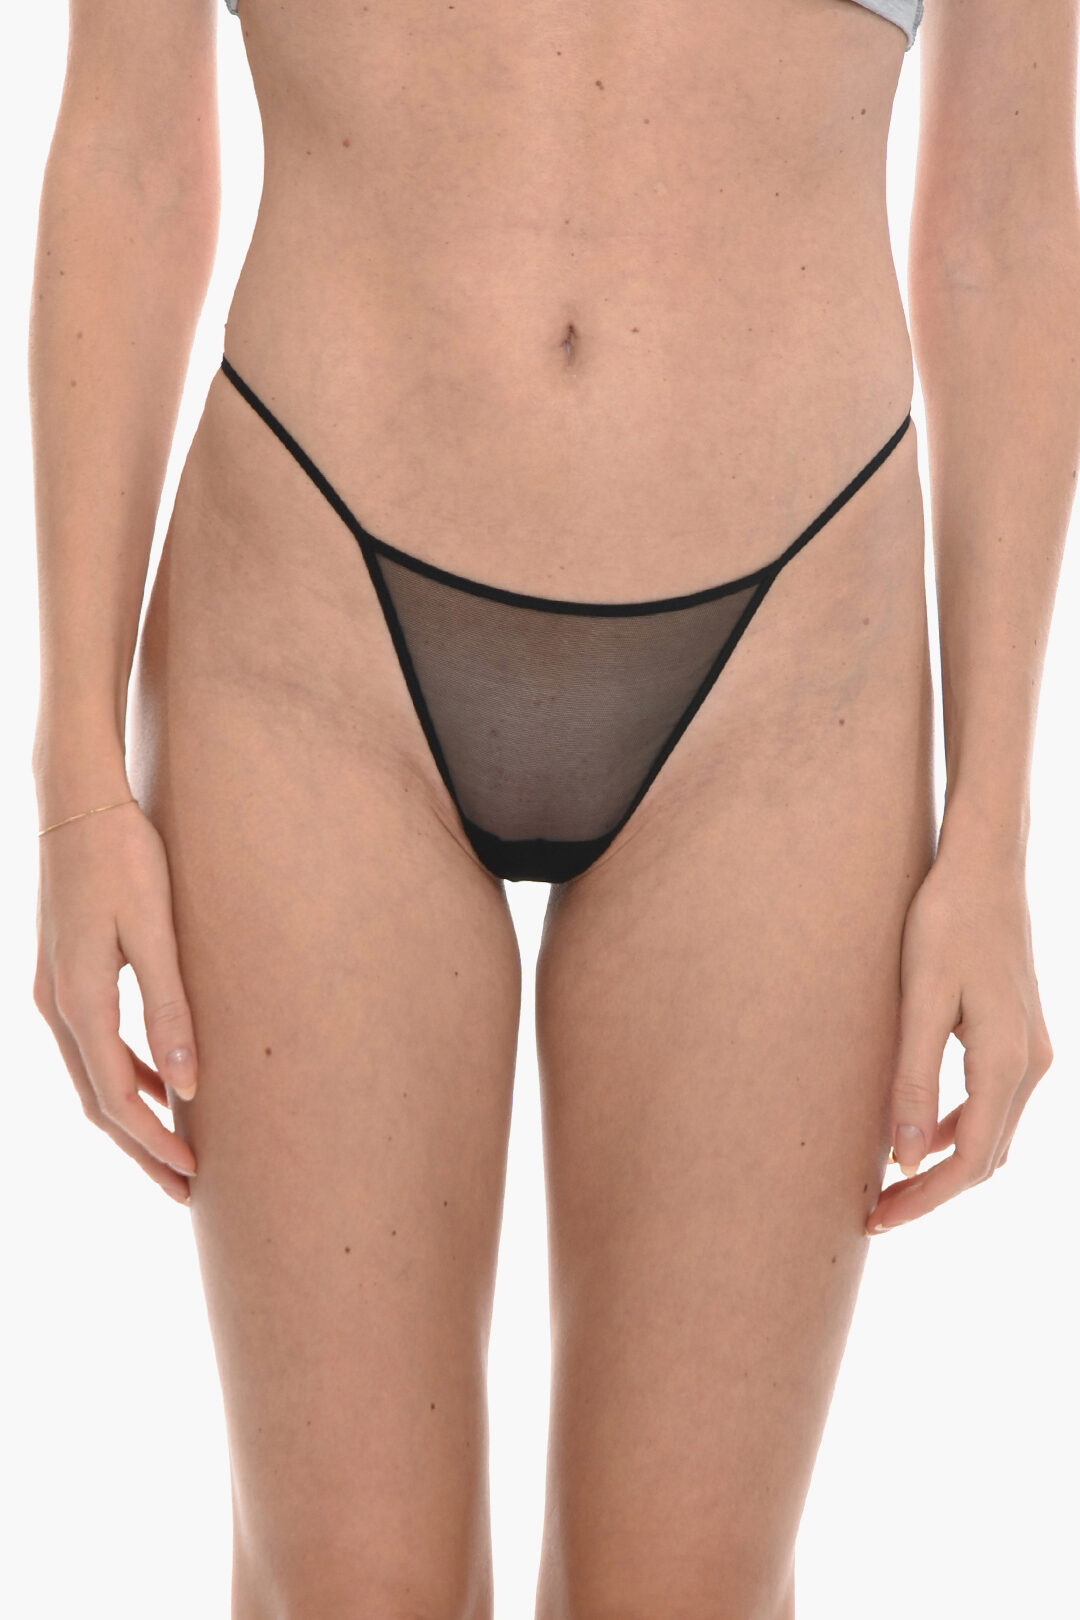 Nensi Dojaka Solid Color See-Through Thong women - Glamood Outlet